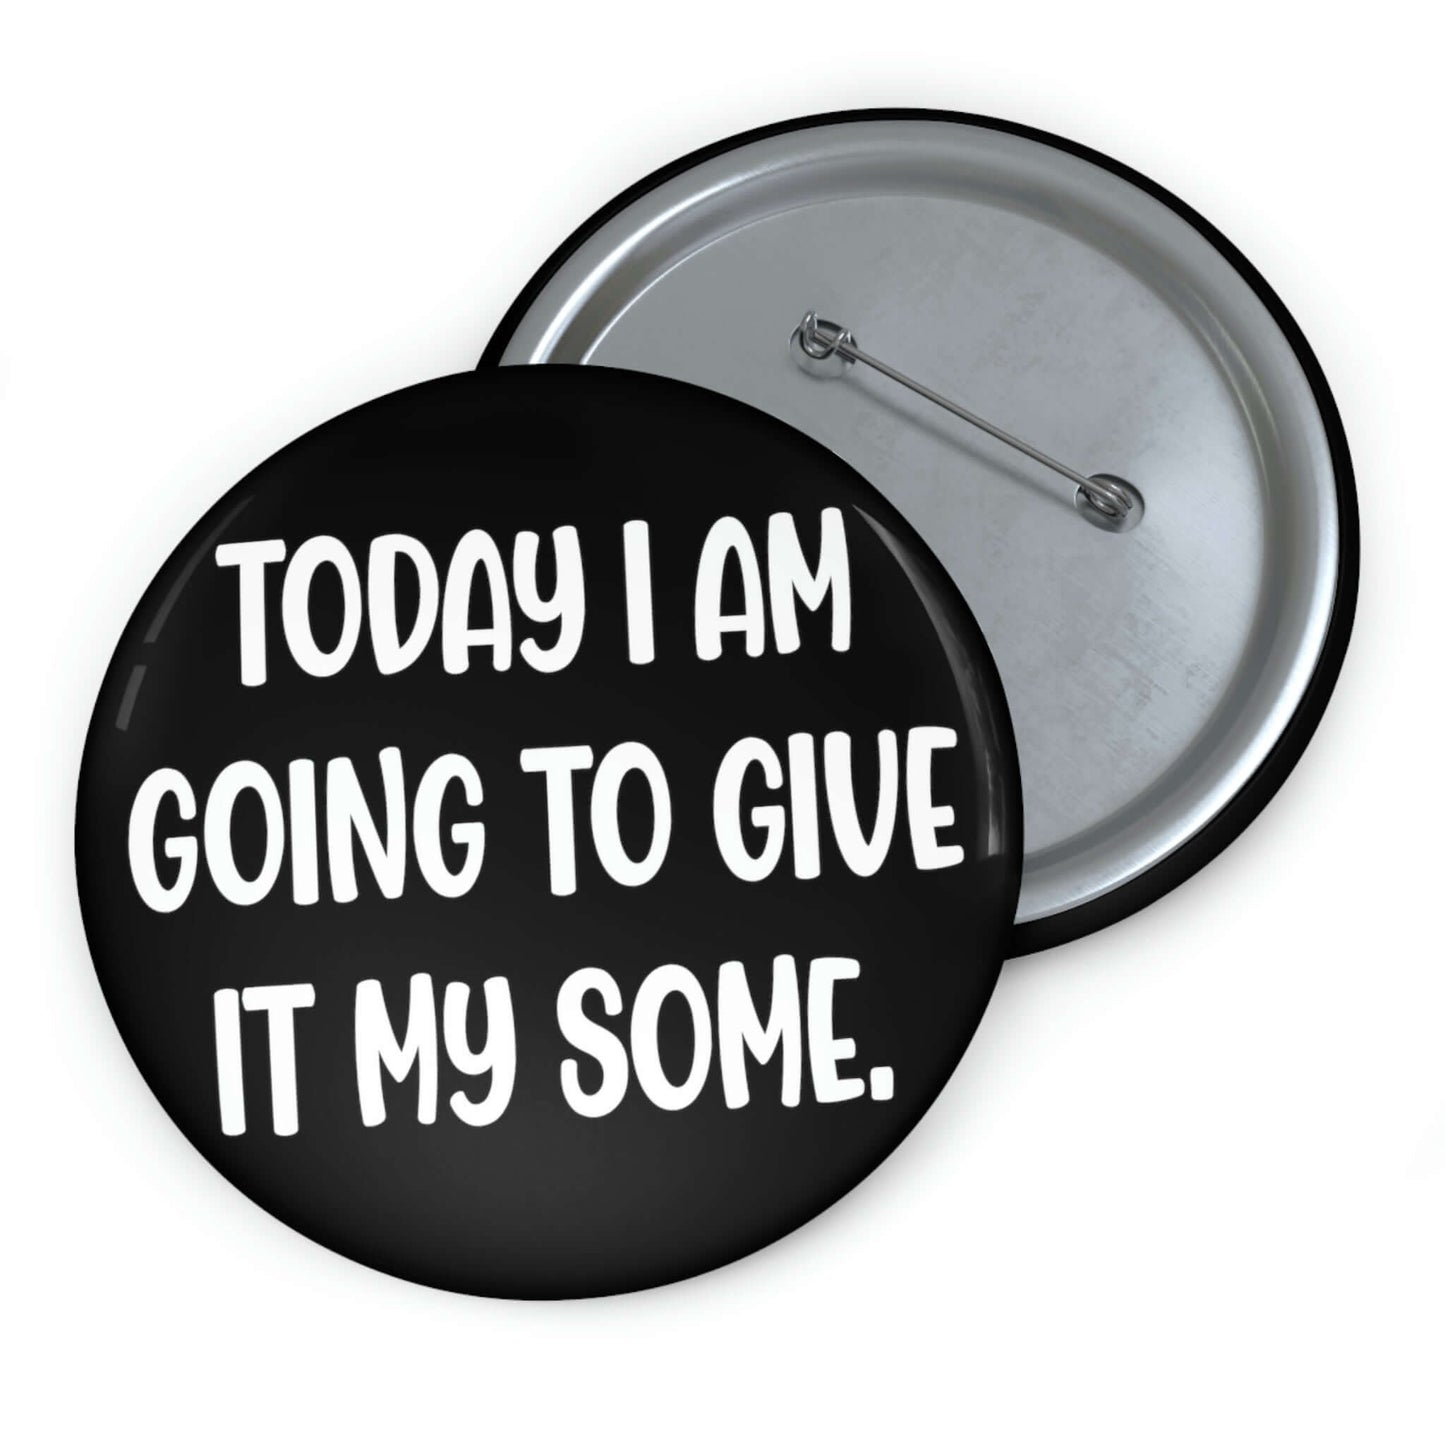 Give it my some pinback button